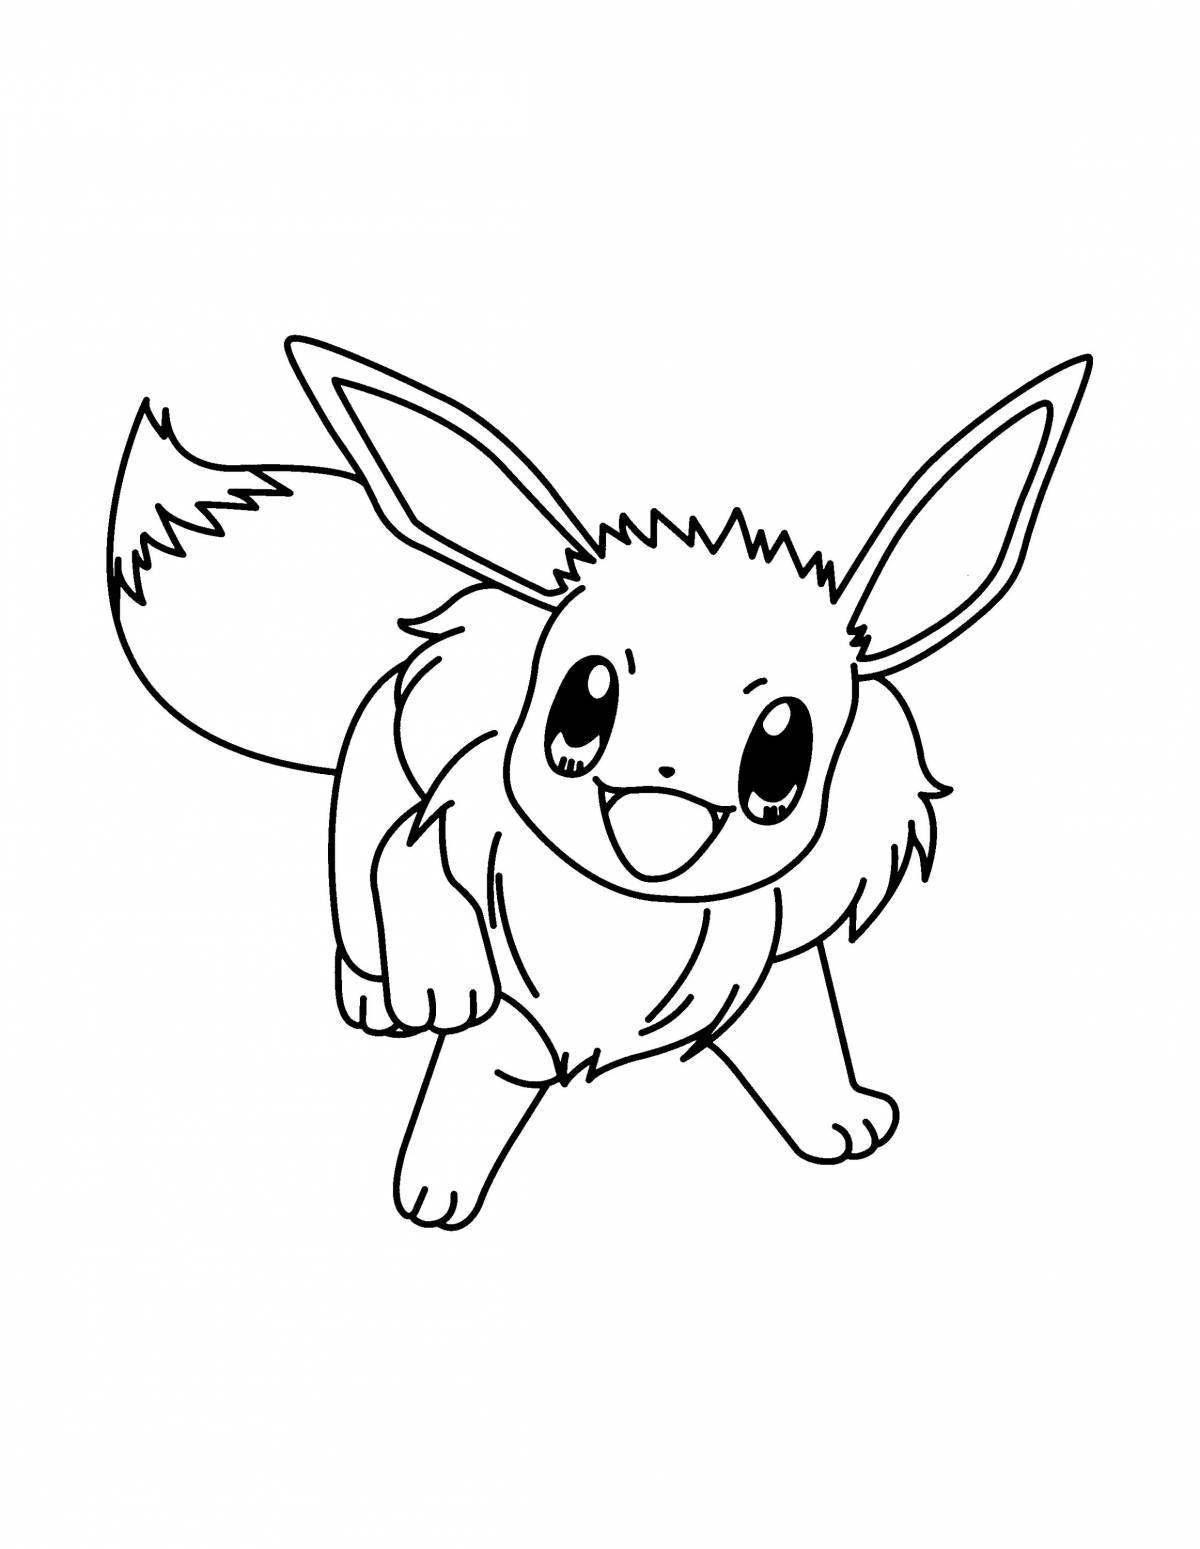 Adorable coloring book for Evie and Pikachu